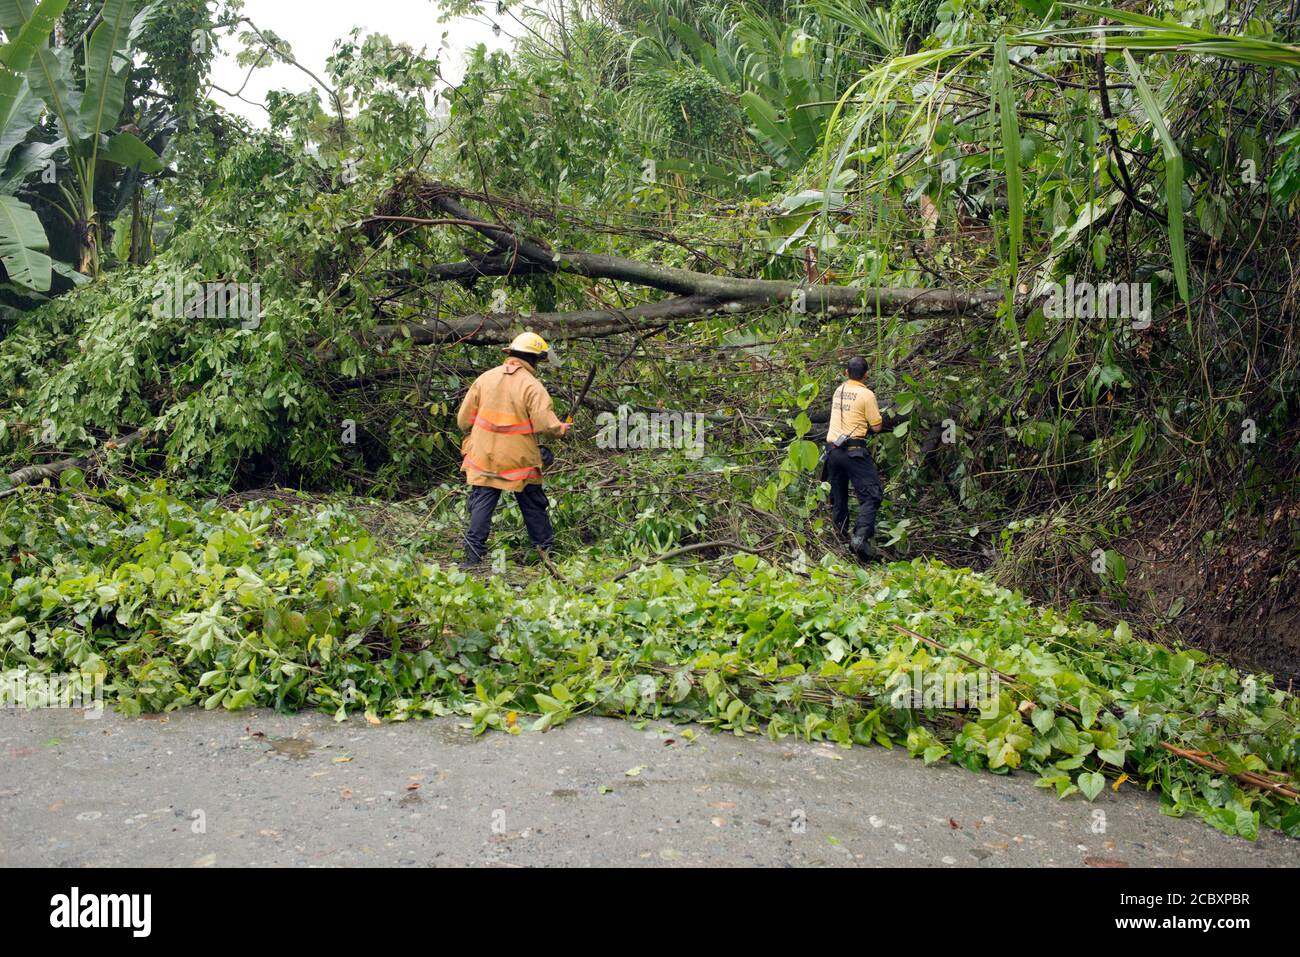 Hurricane Otto caused a landslide that blocked the road from Bribri to Suretka, Talamanca, Limón Province, Costa Rica on November 21, 2016. Stock Photo